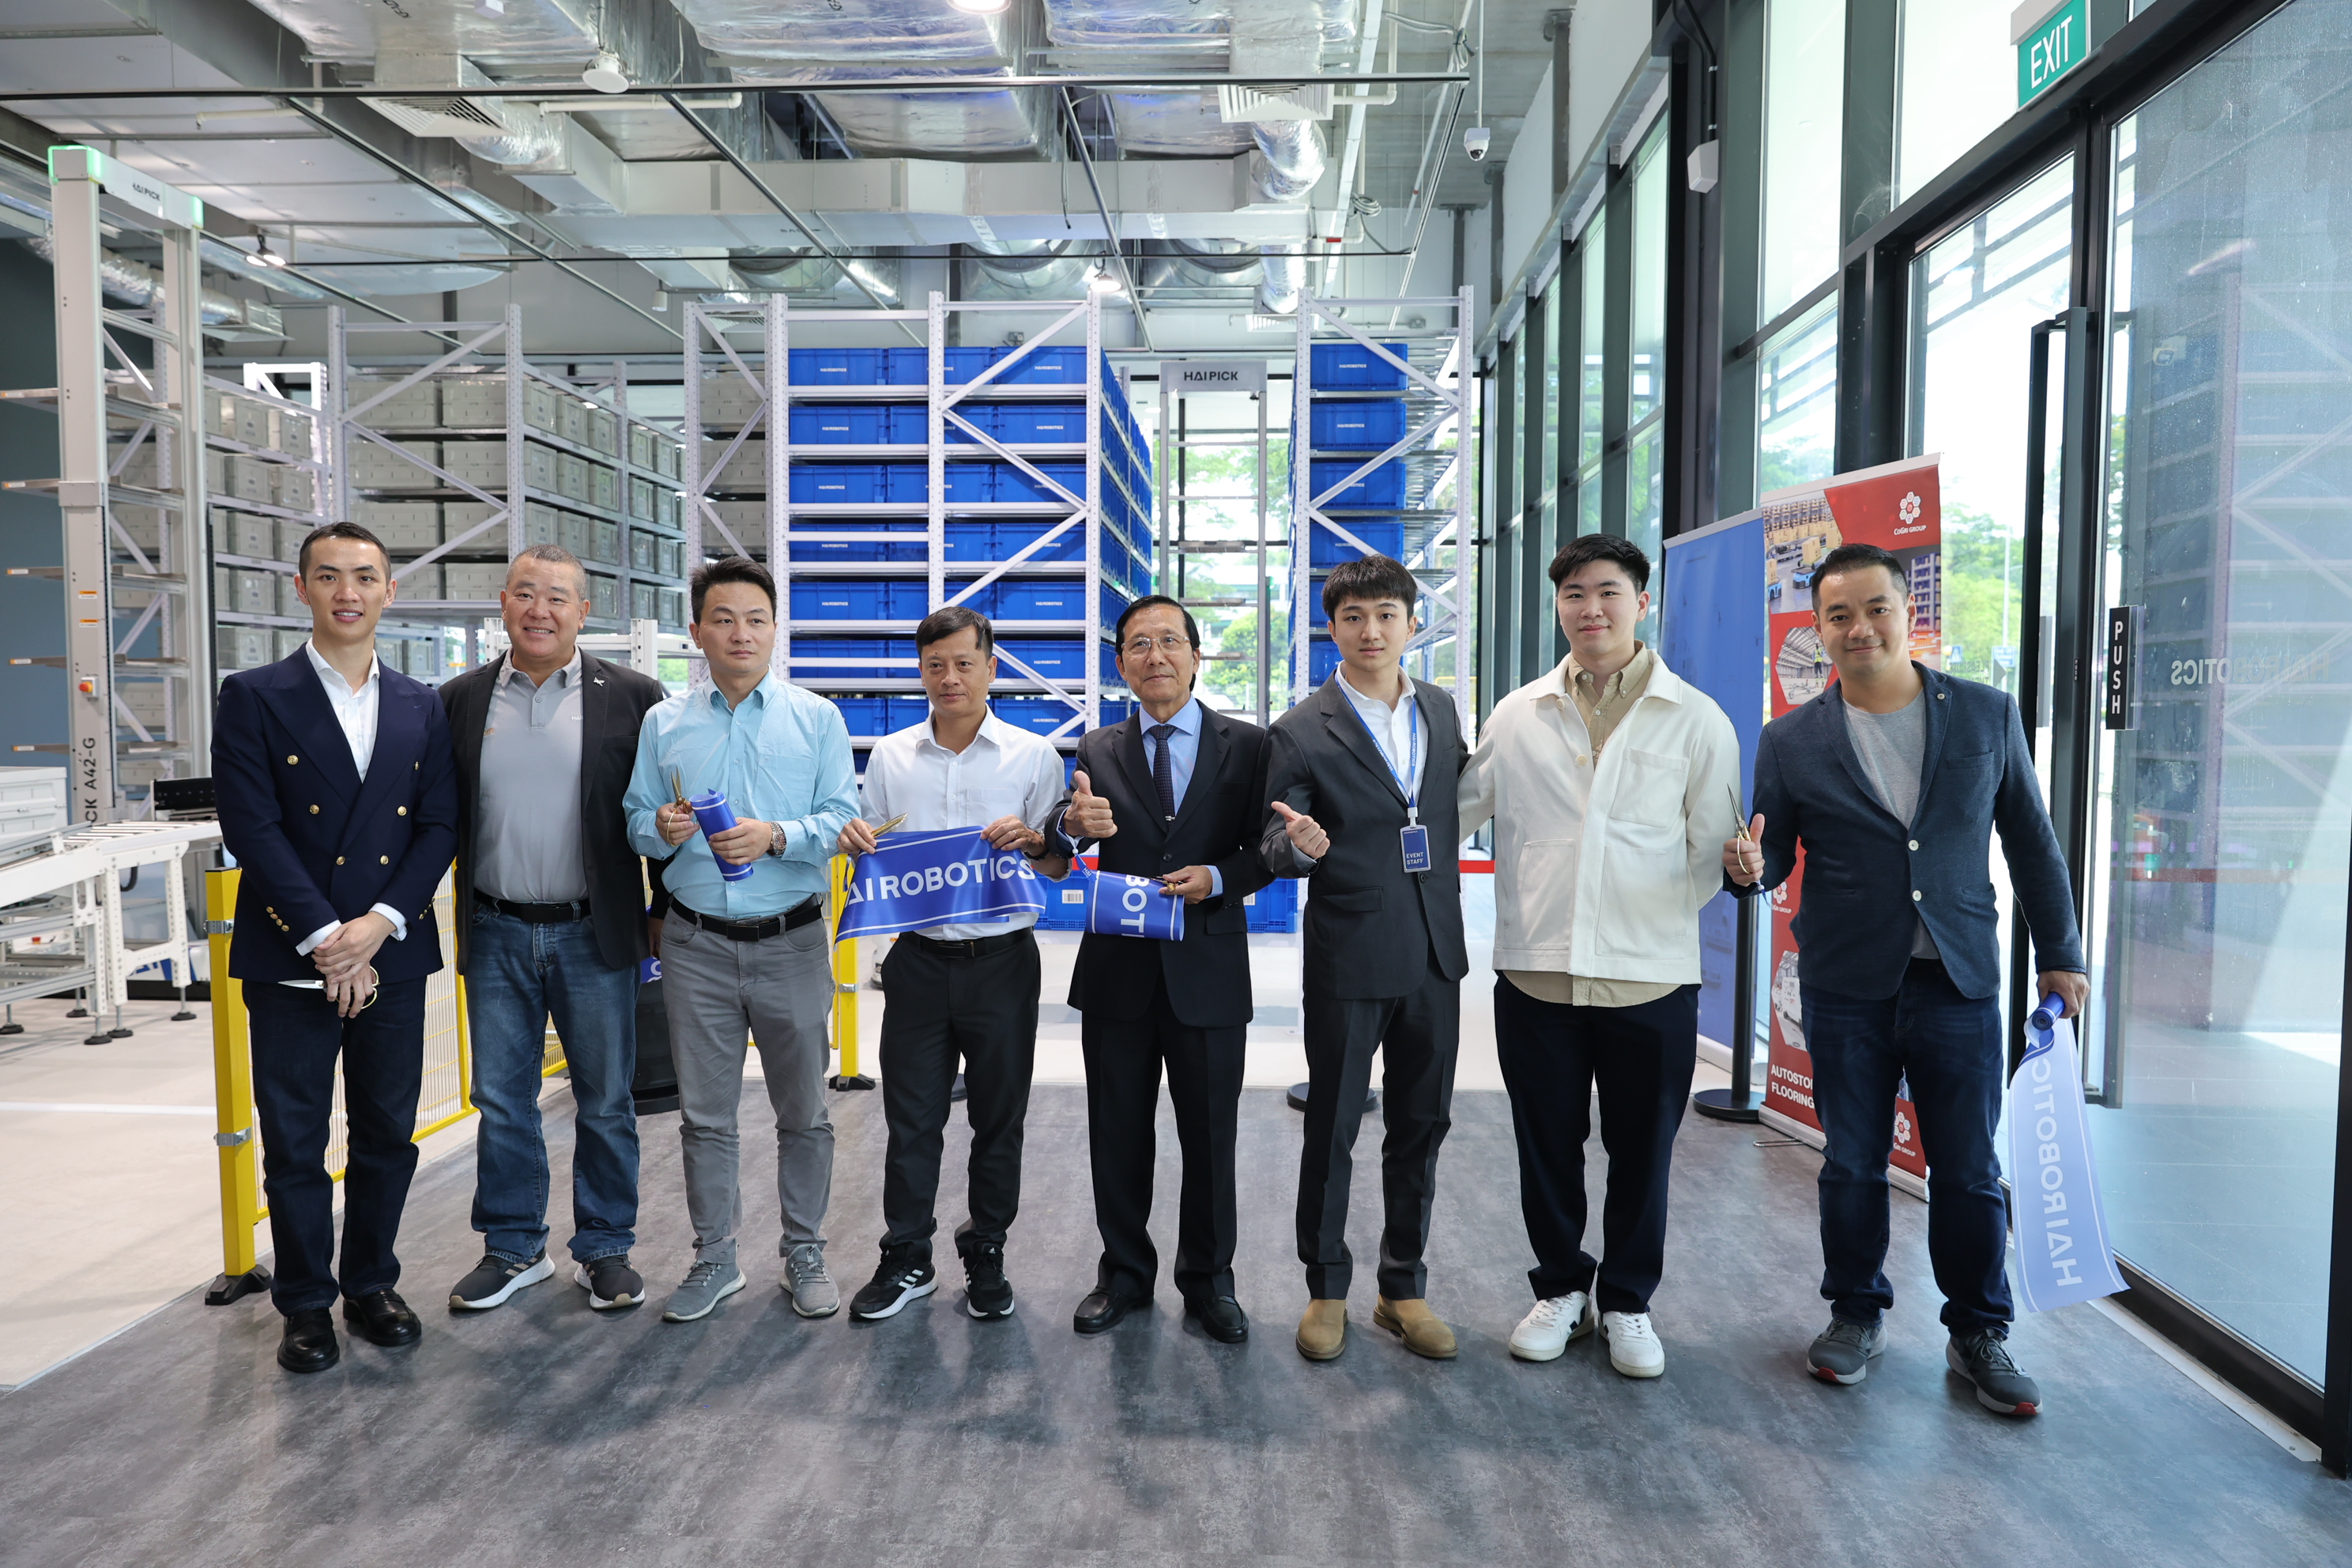 The important step in cooperation between Hai Robotics and ACETEC Technology: Opening a new office and state-of-the-art product showcase center in Singapore for the advancement of robotic technology in automated warehouse systems in the Southeast Asian region.